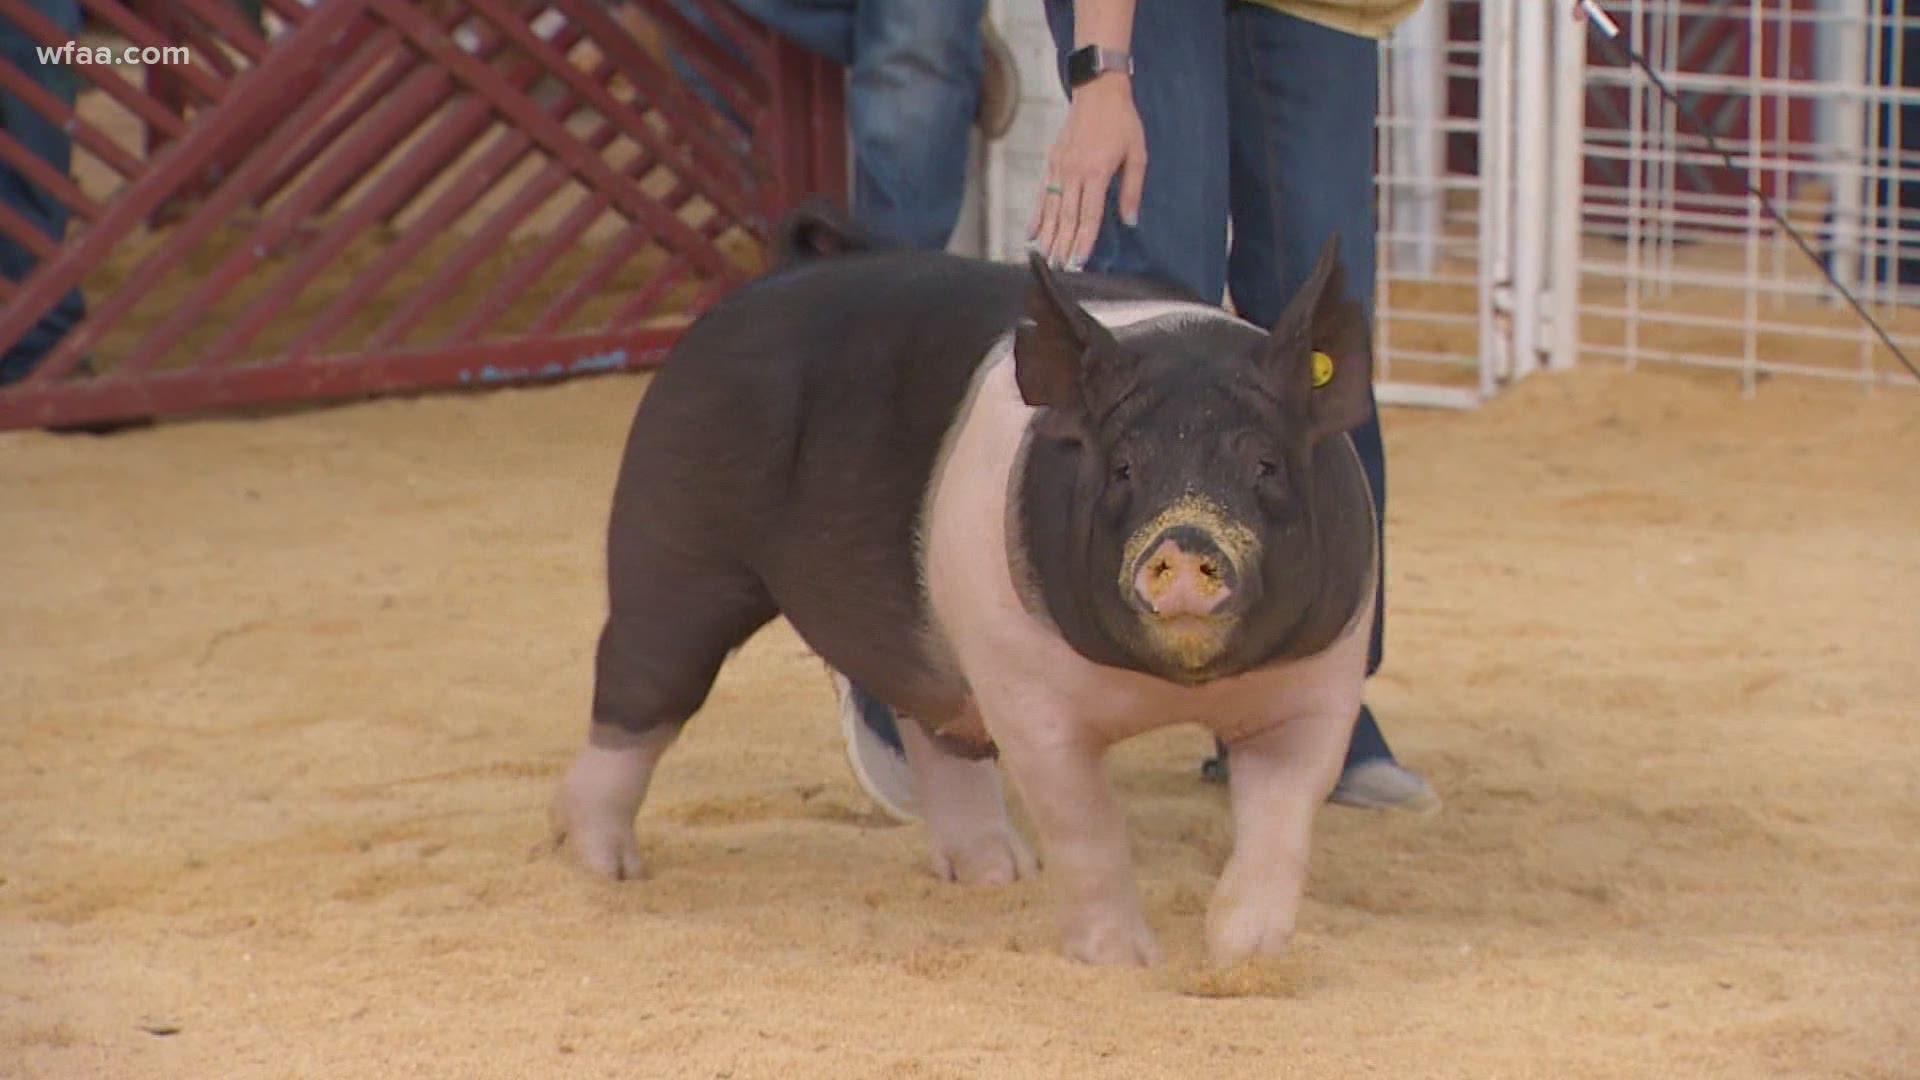 One of the final shows this year at Fair Park was the swine show. But how on earth does a judge decide what makes a winning pig? Reporter Sean Giggy found out.